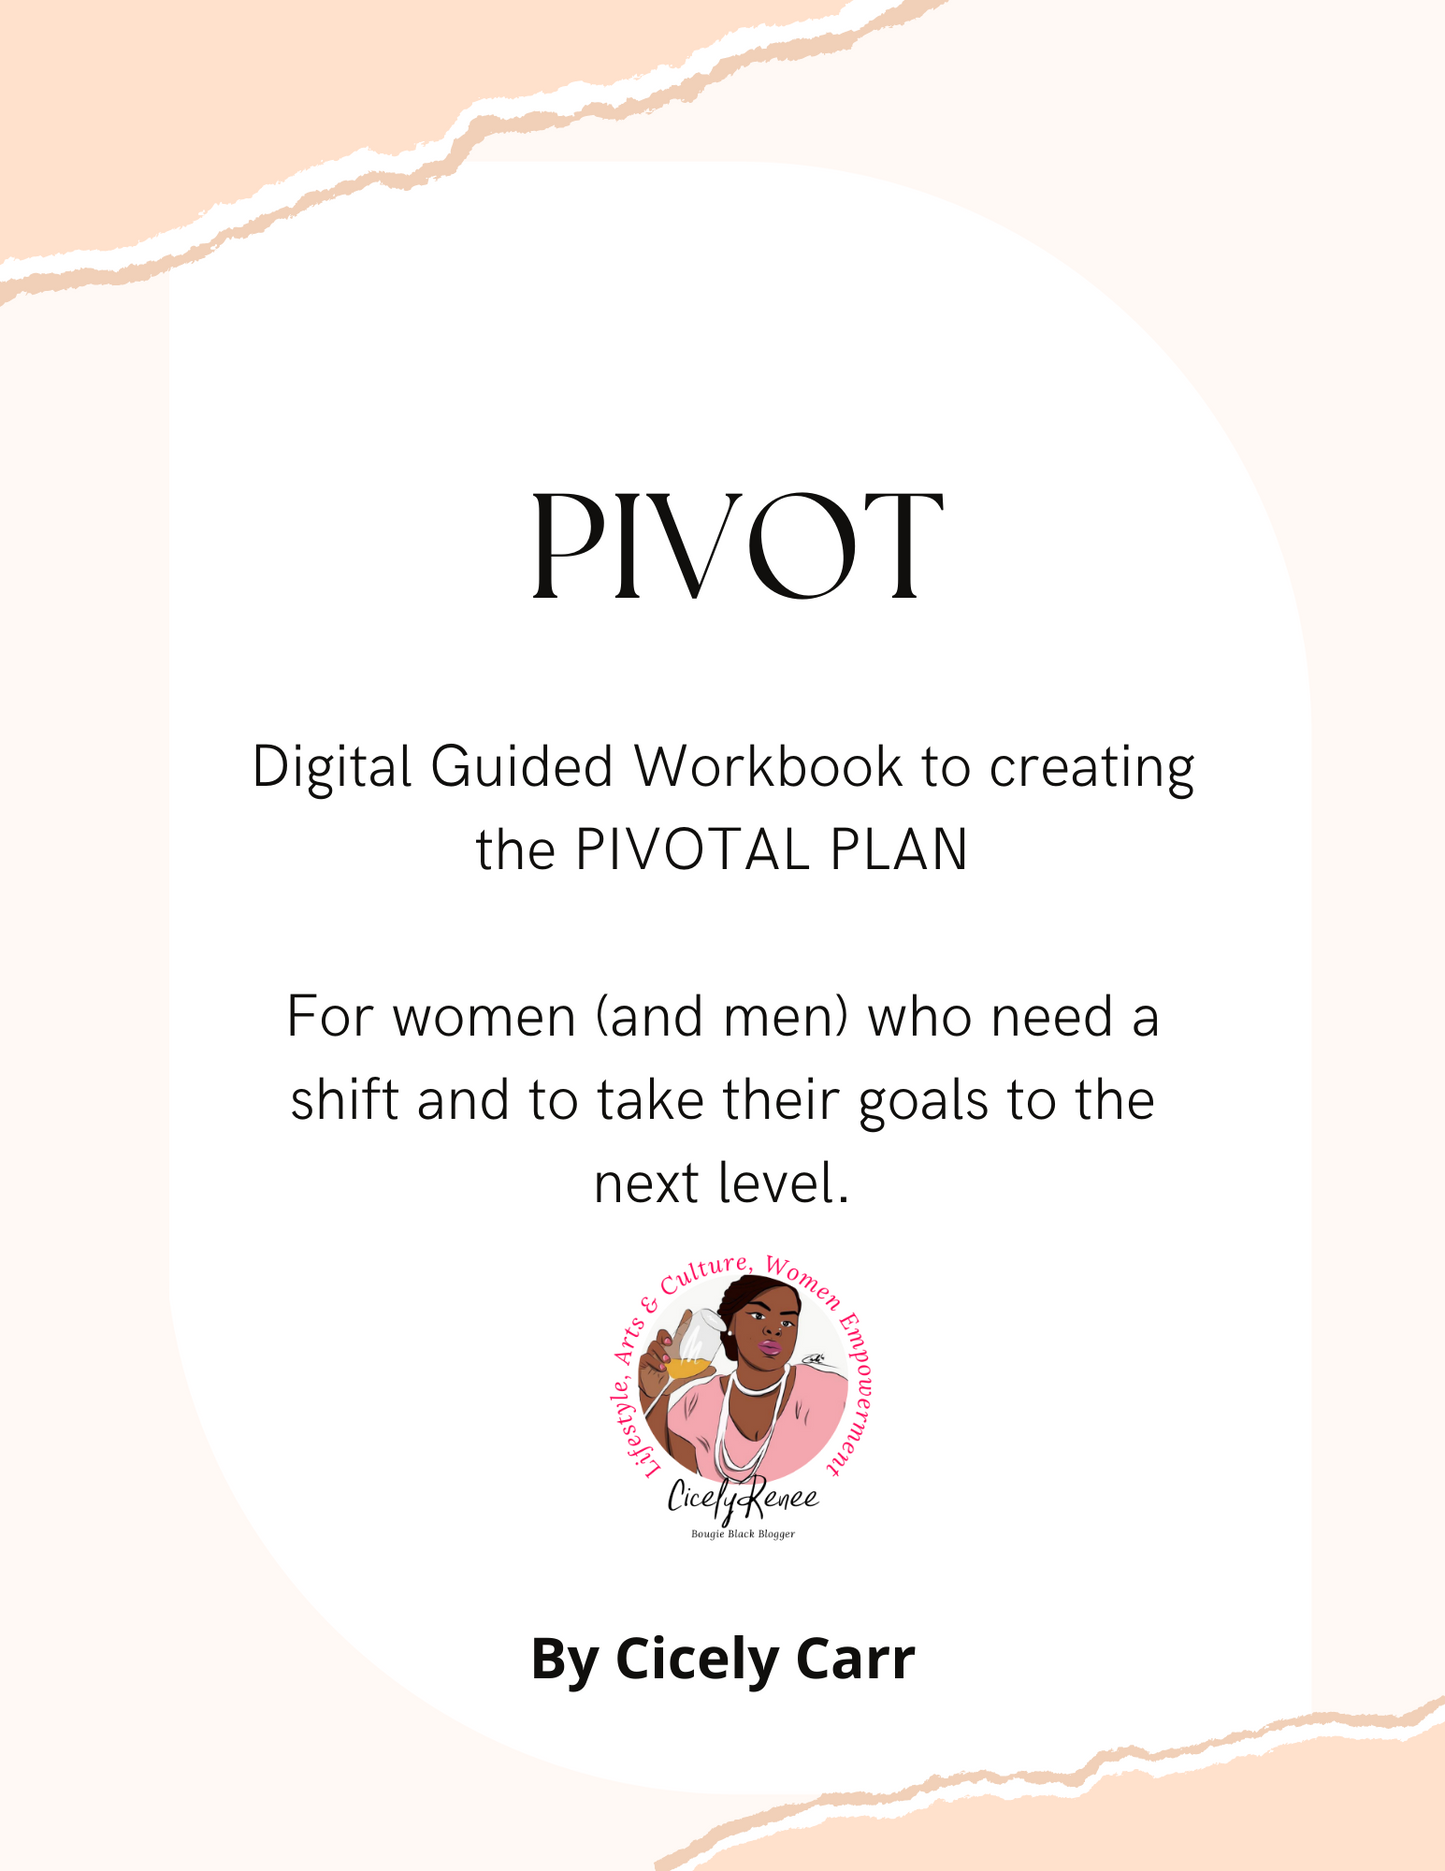 Empower Micro-Webinar: Pivot, Why You and Your Business Need To